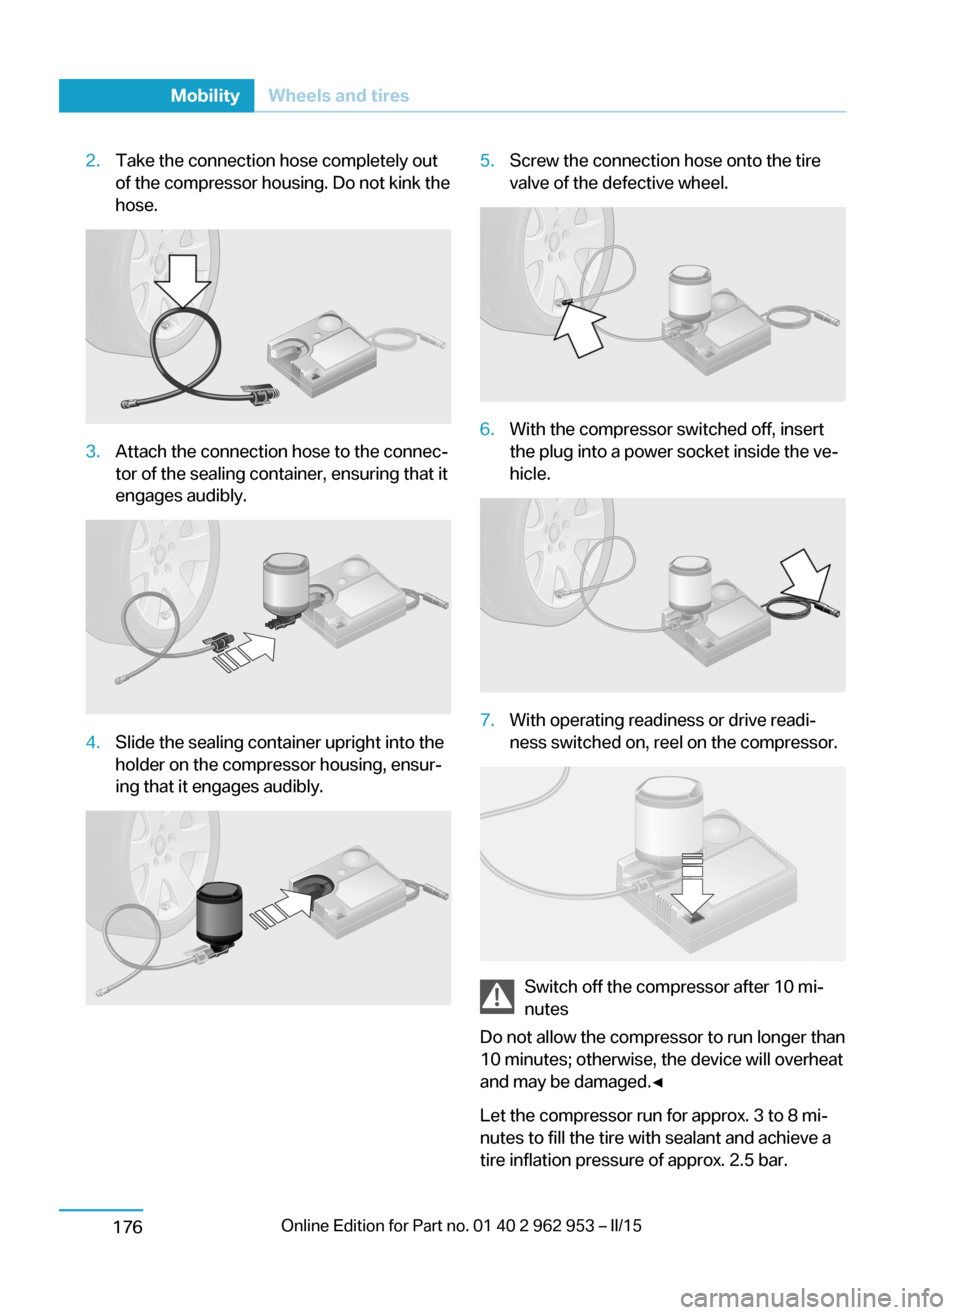 BMW I3 2014 I01 User Guide 2.Take the connection hose completely out
of the compressor housing. Do not kink the
hose.3.Attach the connection hose to the connec‐
tor of the sealing container, ensuring that it
engages audibly.4